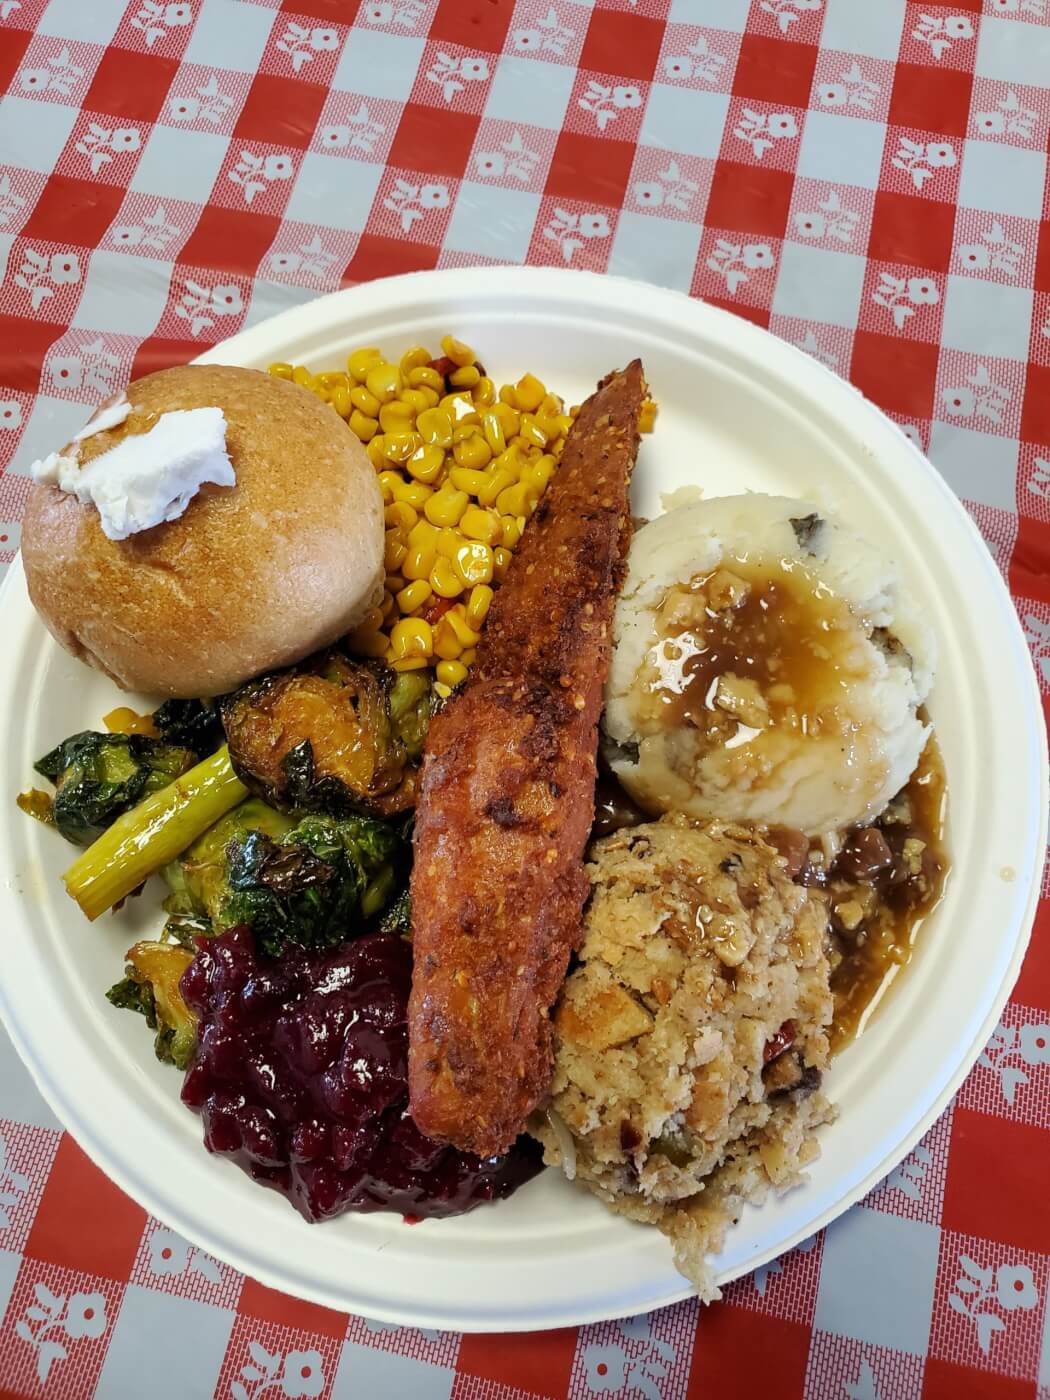 vegan thanksgiving plate with seitan turkey breast from green new american